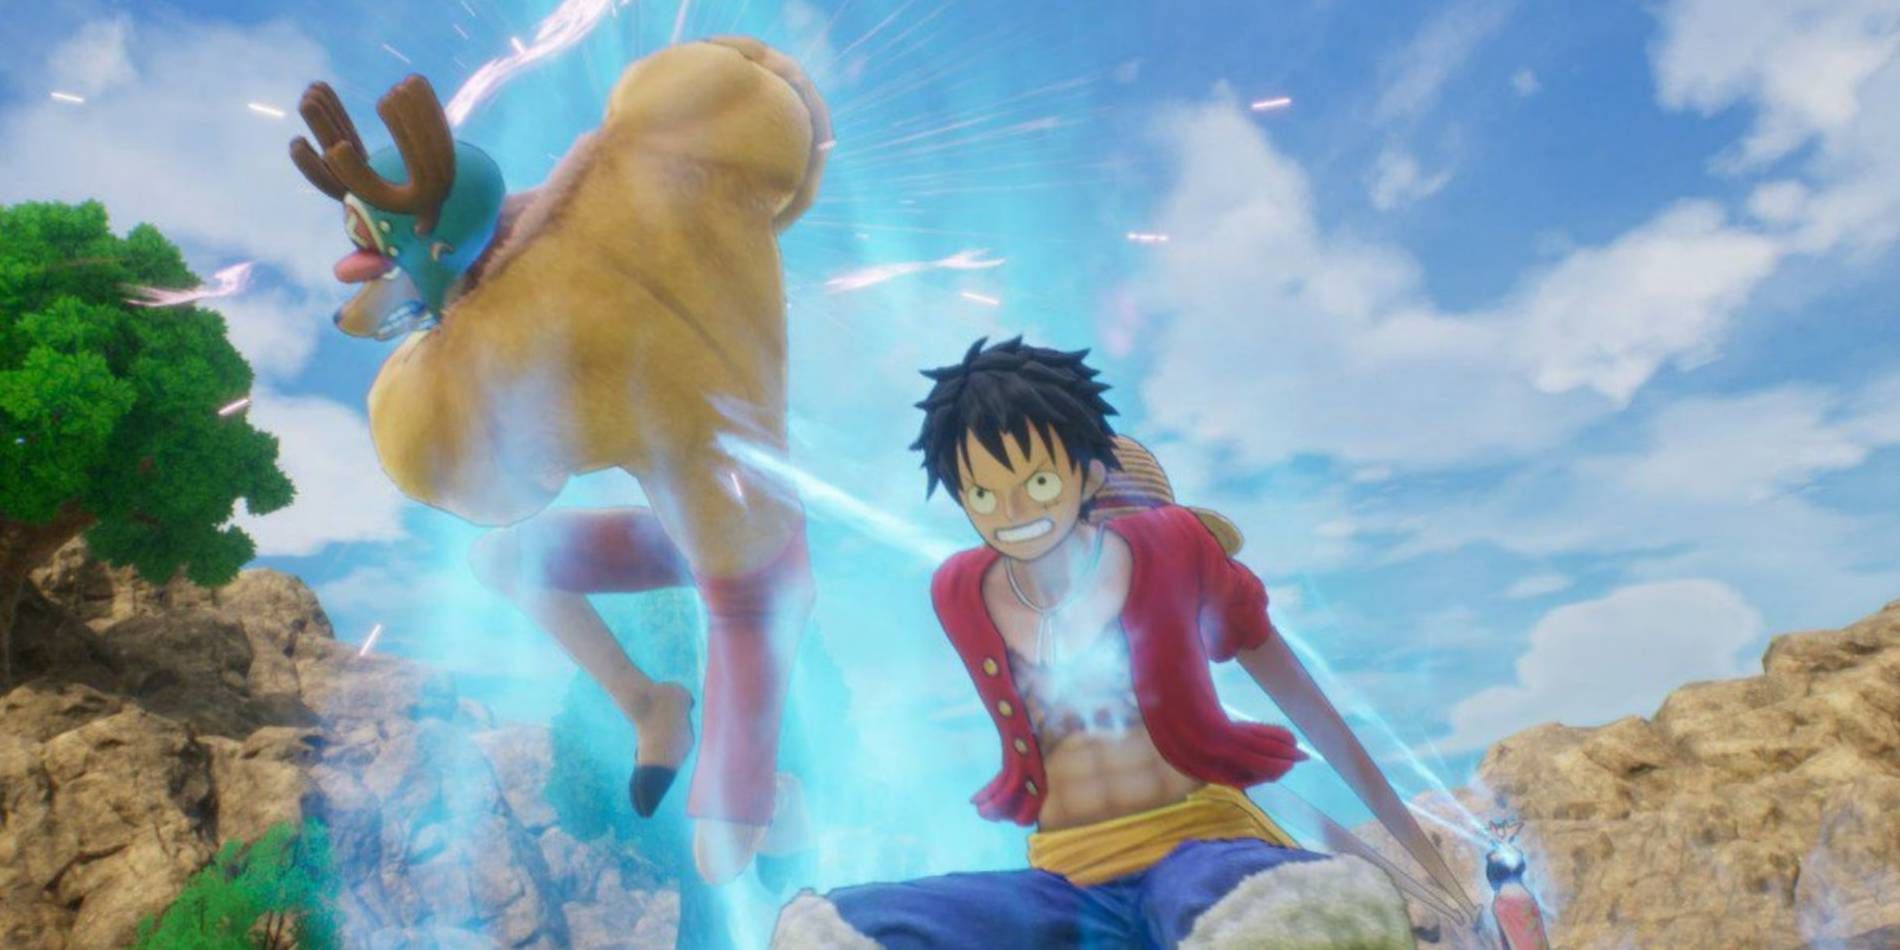 One Piece Odyssey Luffy and Chopper Team Up Special Attack Used through Bond Charge Level Increases